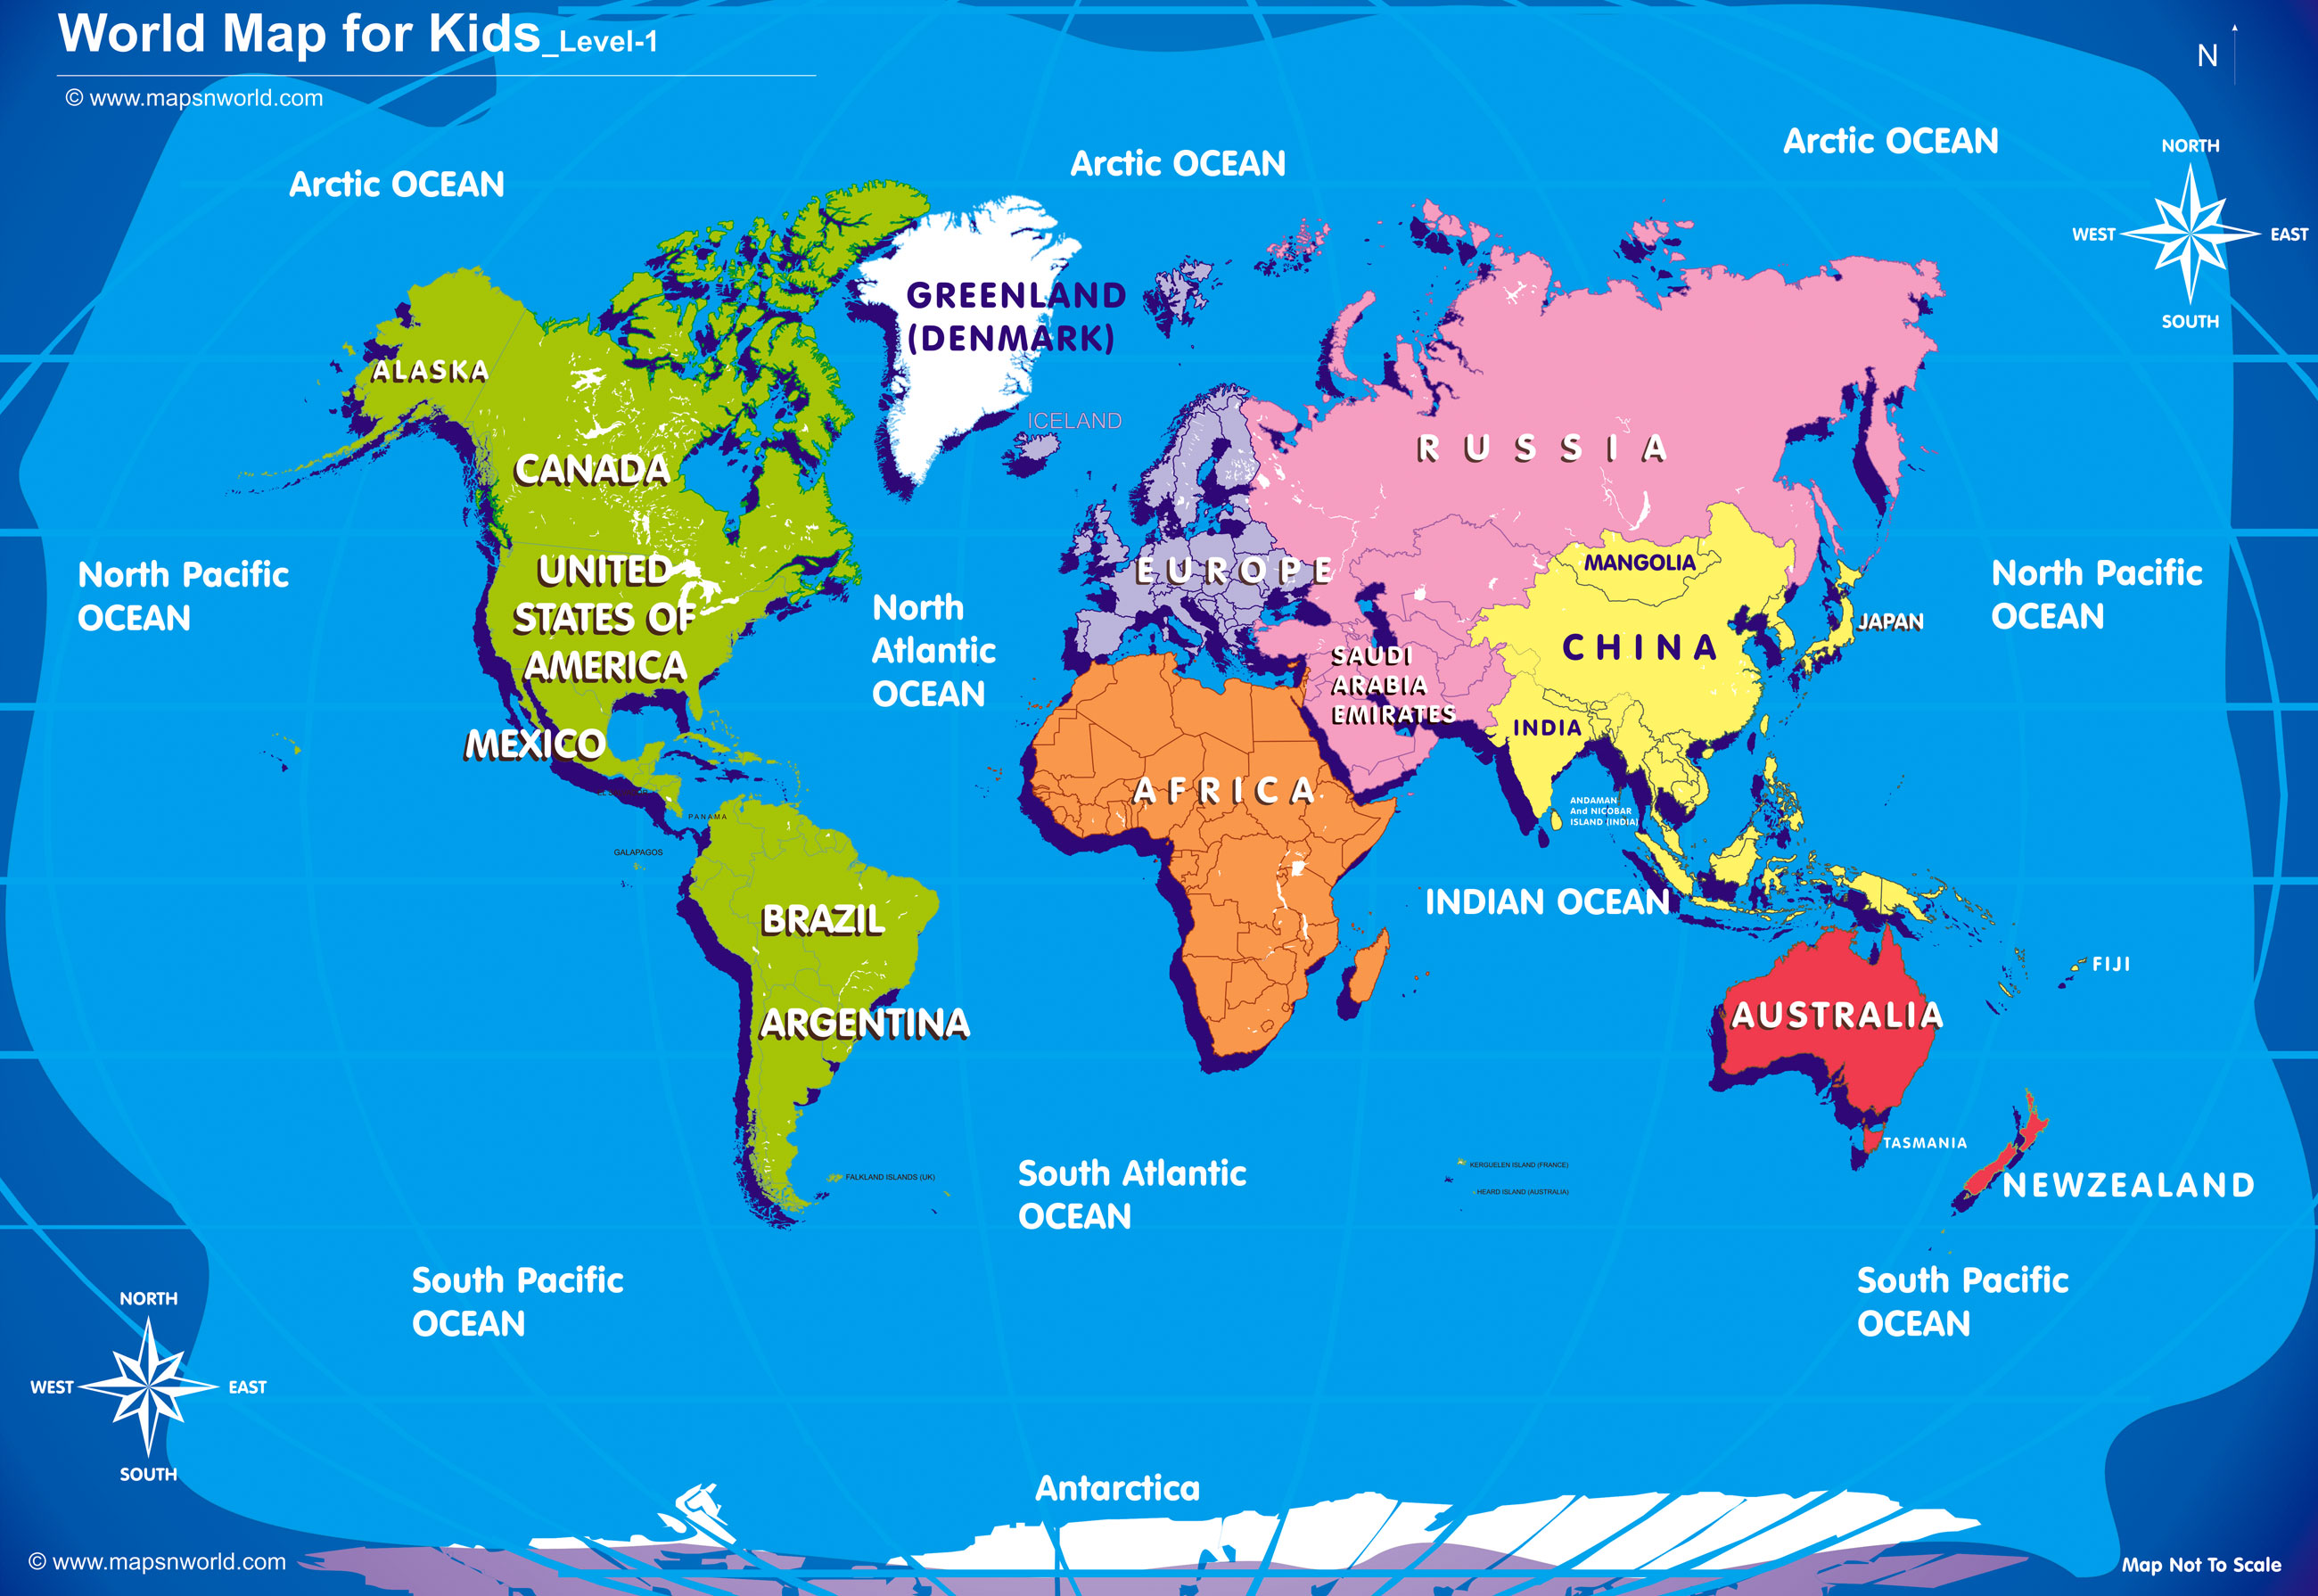 map of the world | Free printable world map, Maps for kids, Kids world map